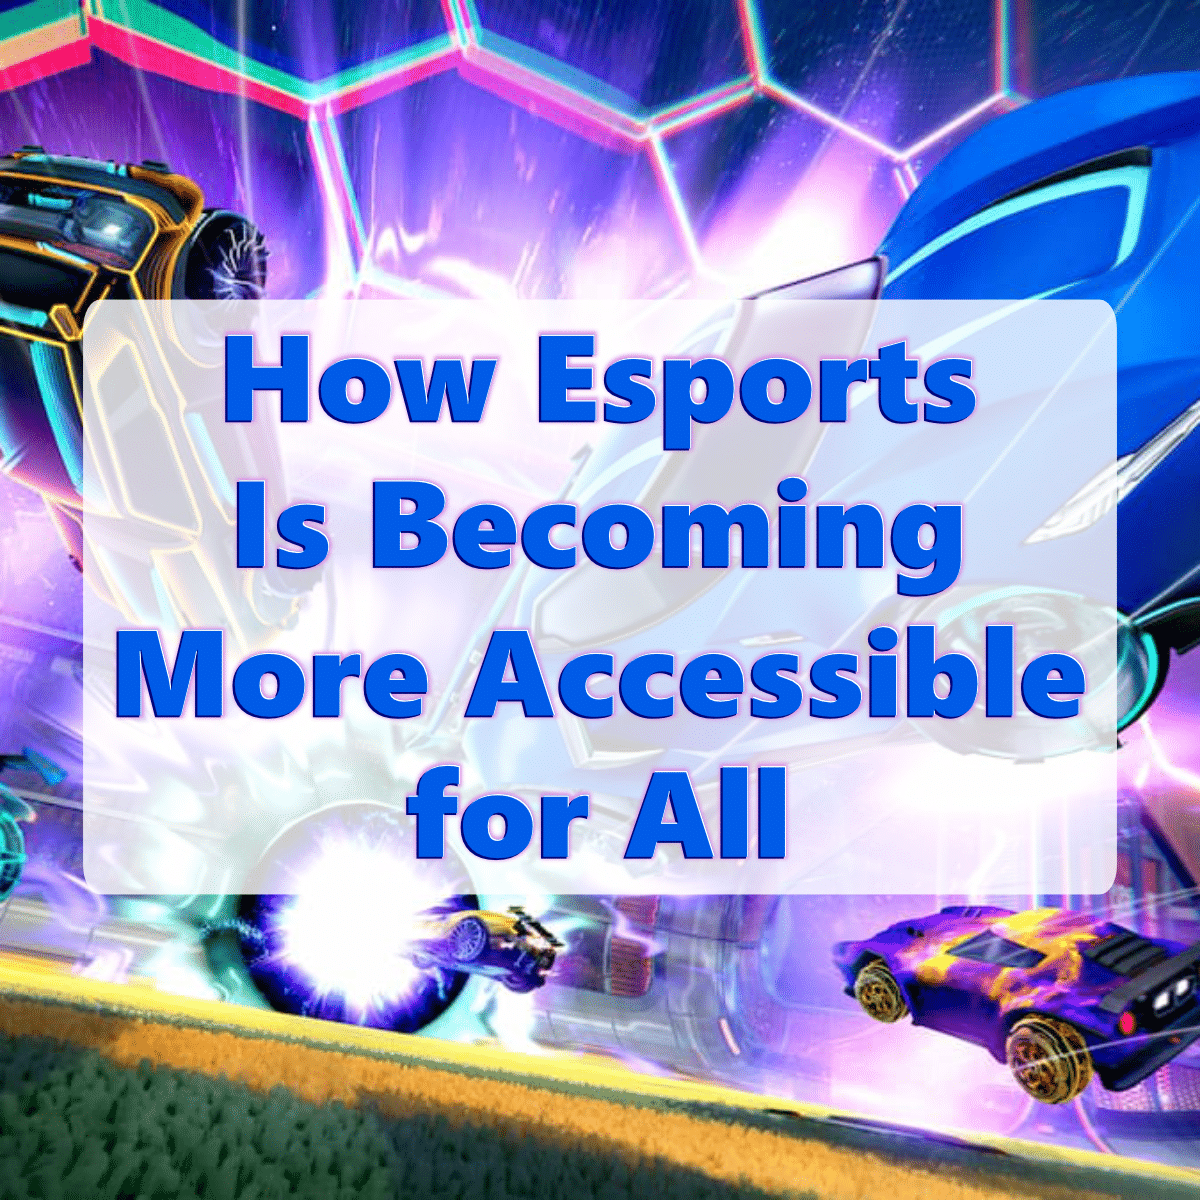 A Rocket League background cars flying out of a portal and text that says 'How Esports Is Becoming More Accessible for All'